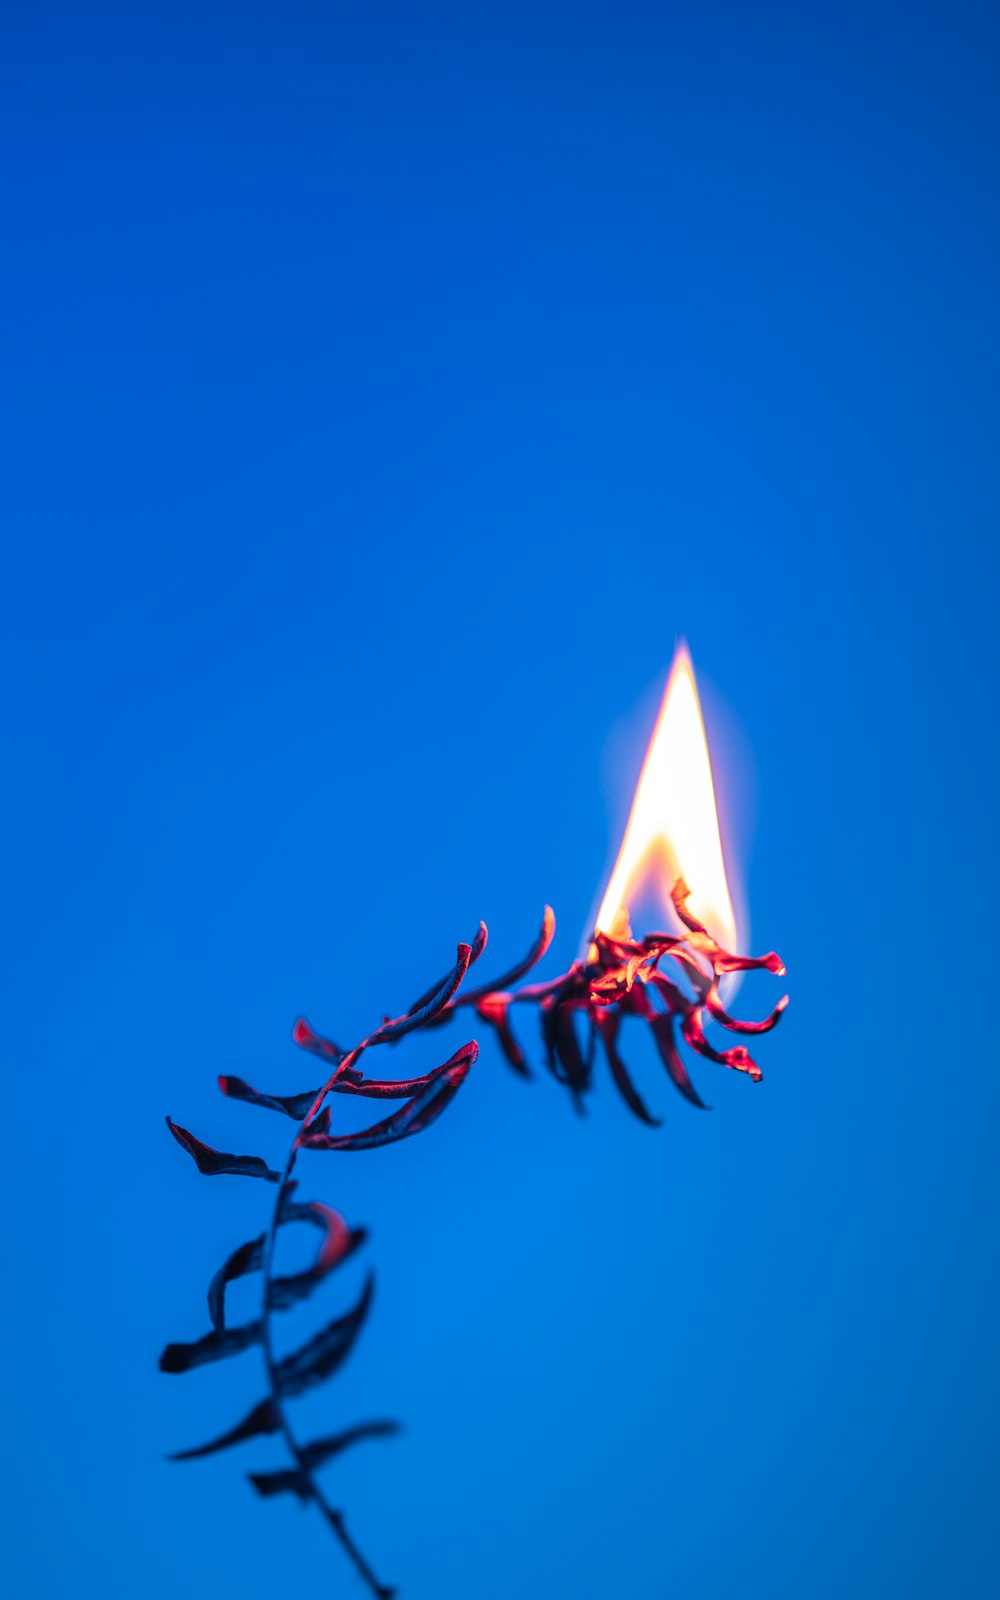 a single candle burning in the middle of a blue sky